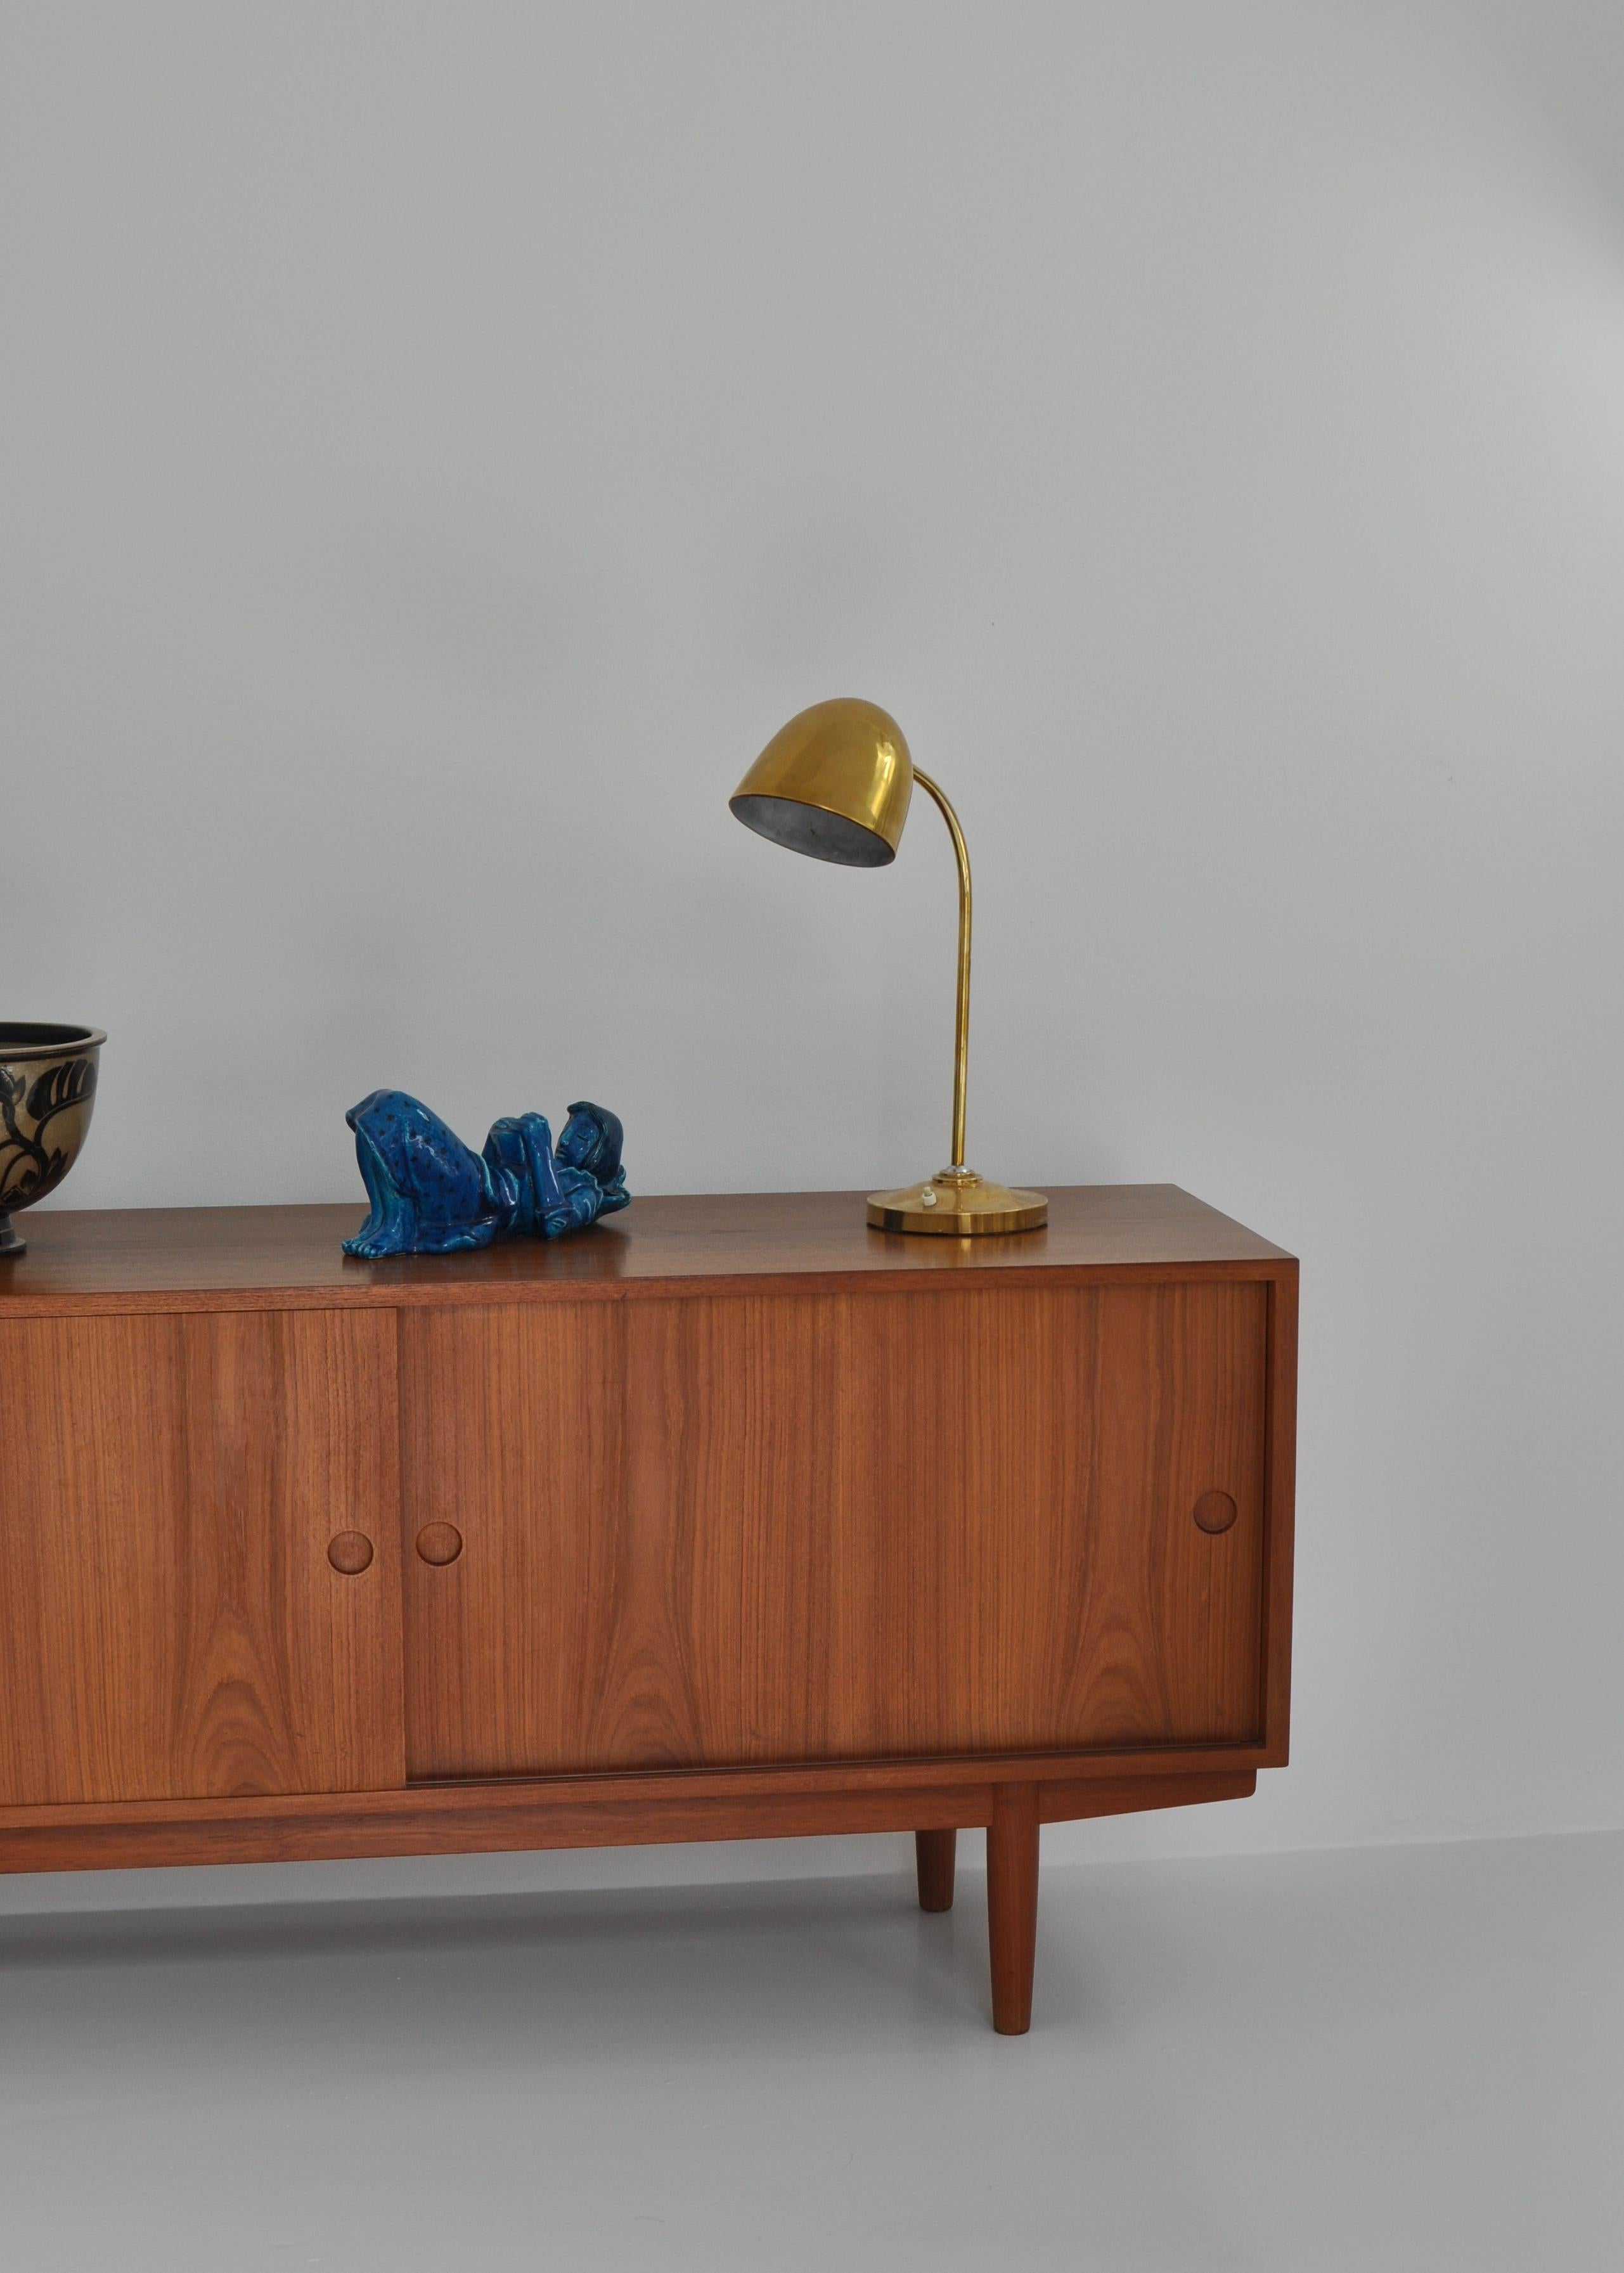 Adjustable table lamp in beautiful patinated brass. Made in the 1940s by Fog & Mørup and ascribed to Danish designer Vilhelm Lauritzen. Great original condition.

Provenance: this lamp was used at the offices of the 